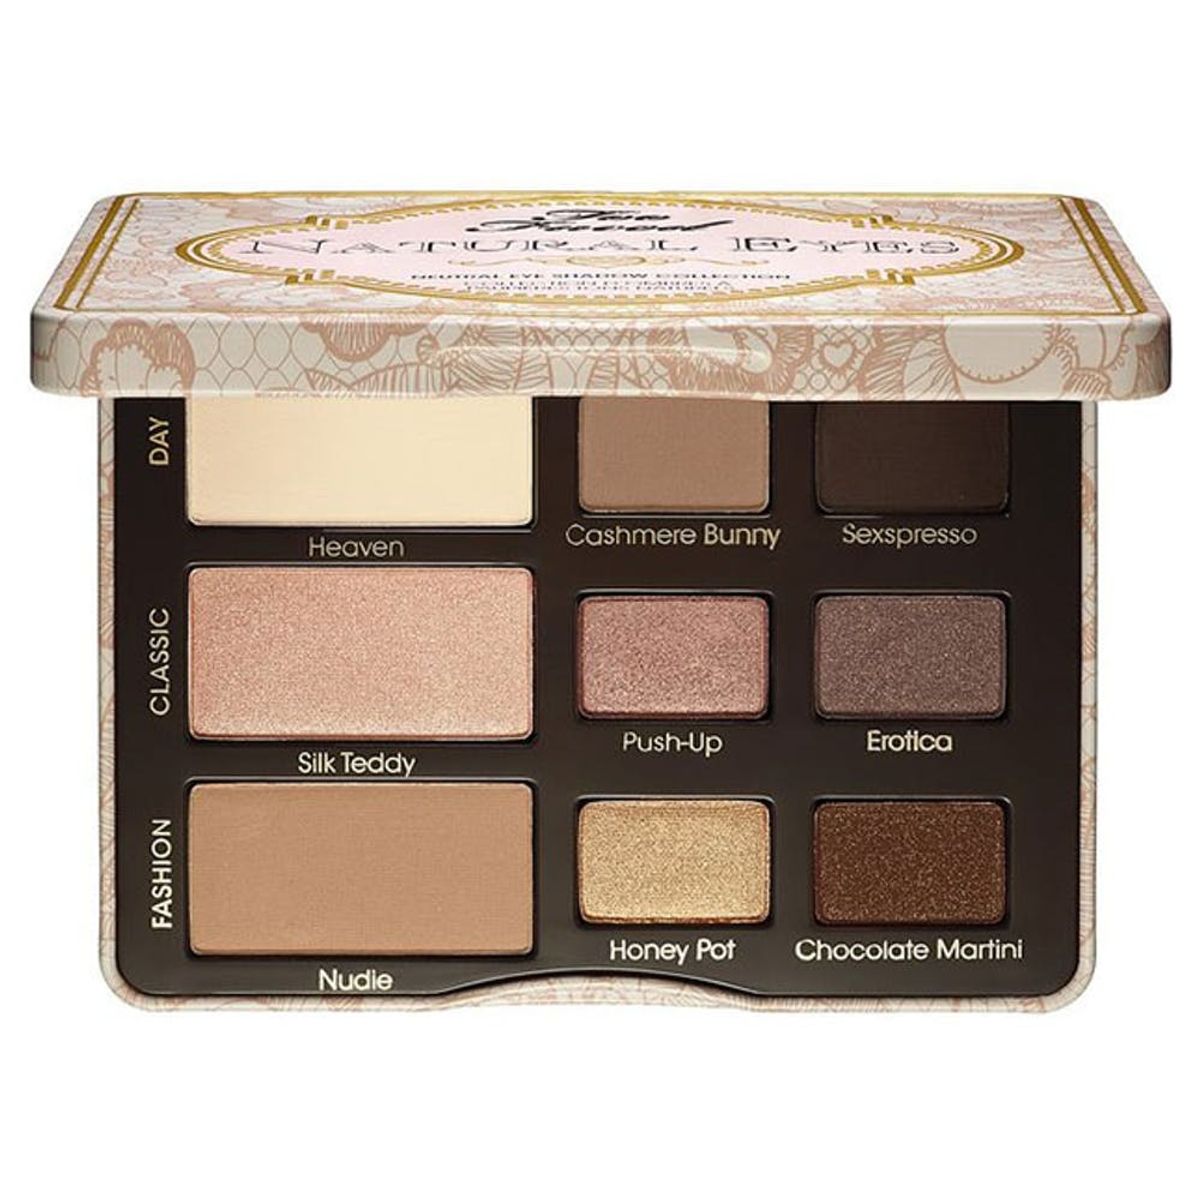 The Top 10 Neutral Eye Palettes to Try Now